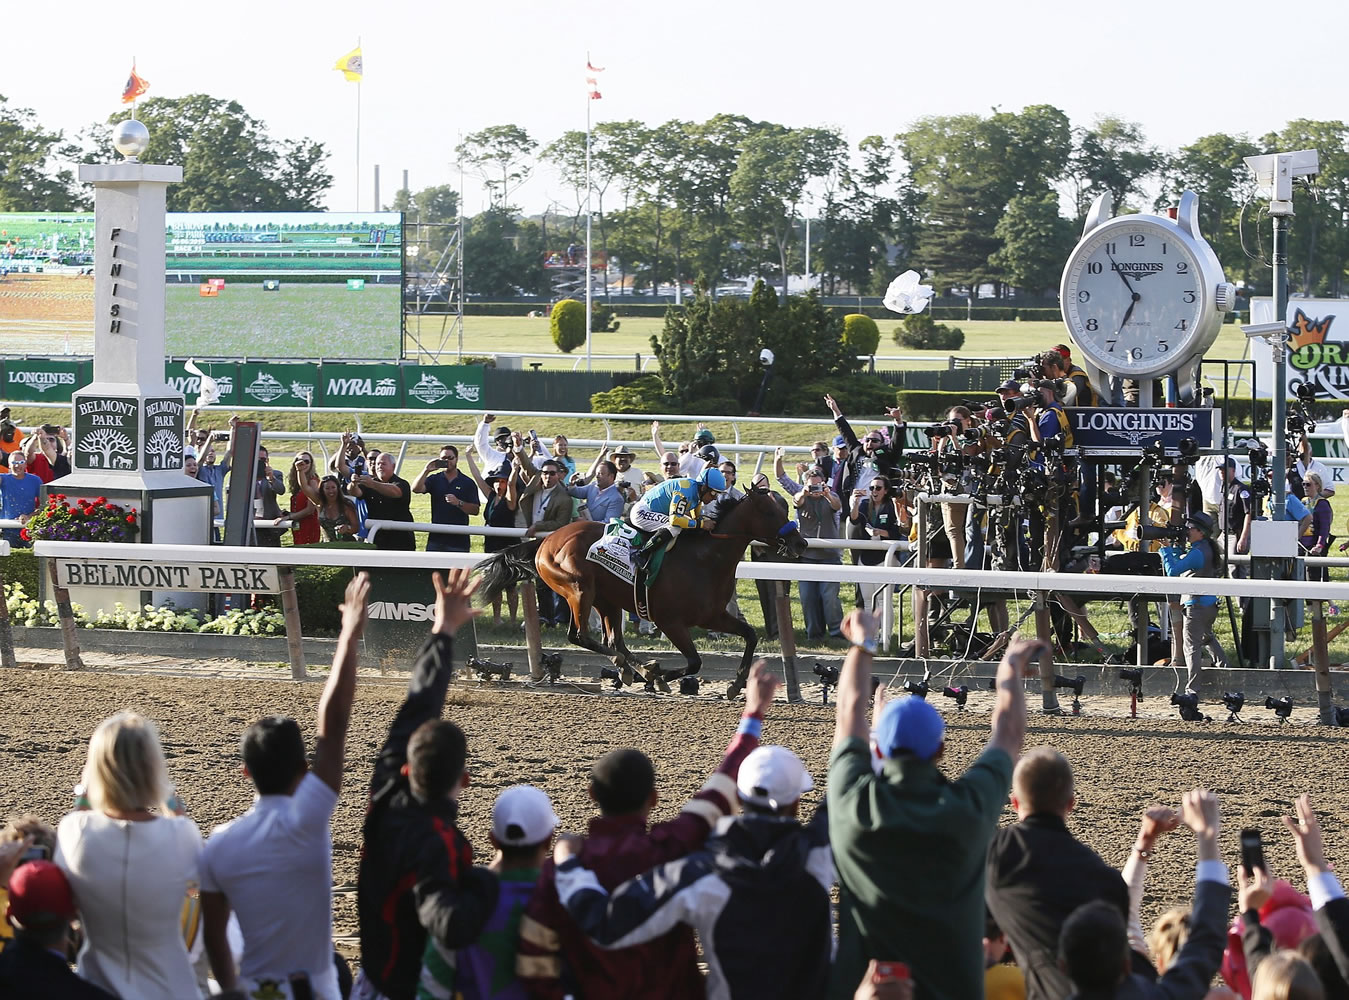 STUART RAMSON/Invision for Longines/AP Images
People cheer as Victor Espinoza rides American Pharoah to victory at the 147th Belmont Stakes on Saturday at Belmont Park in Elmont, N.Y.